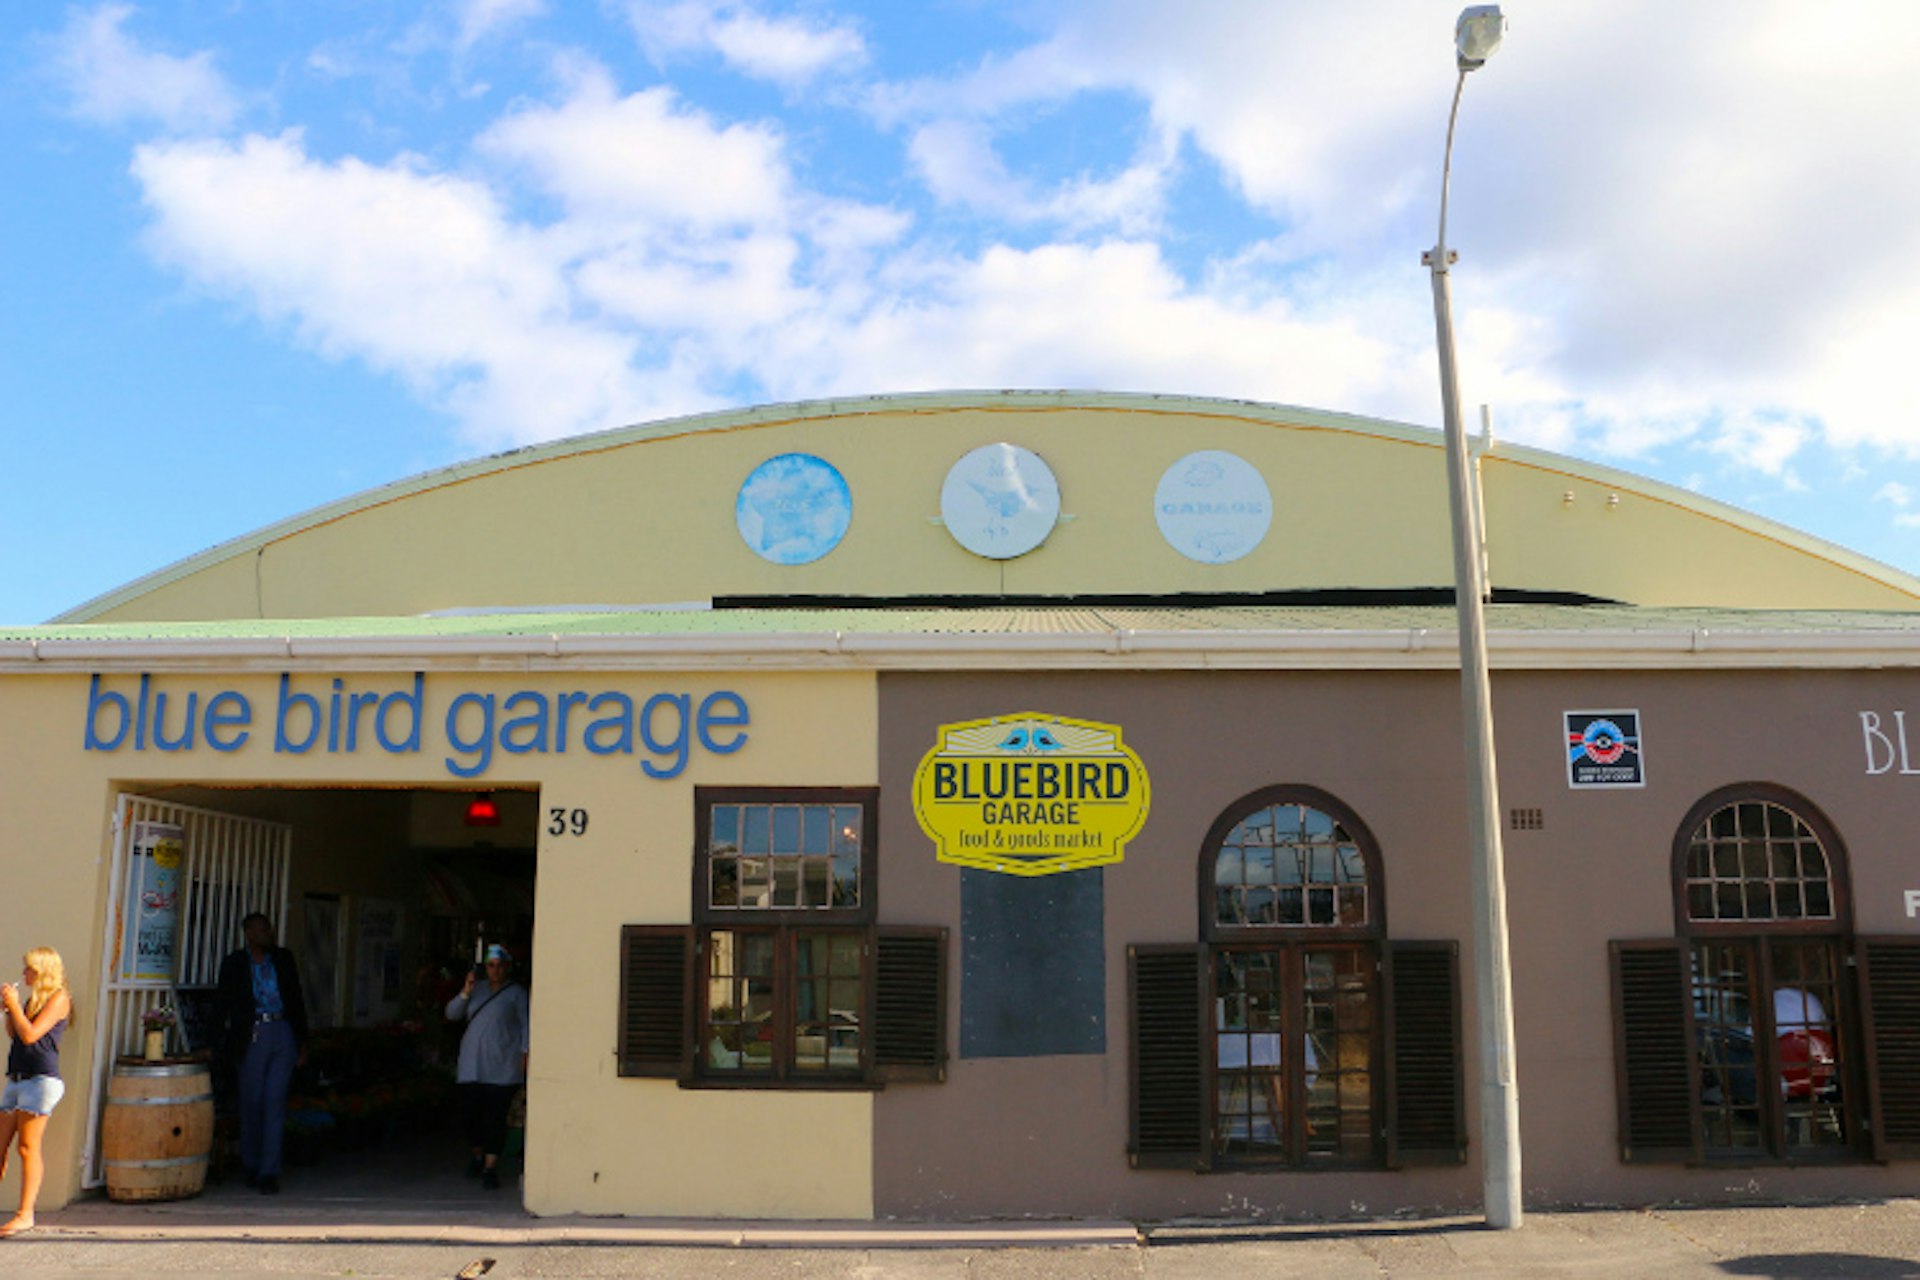 A faded yellow hanger-looking building with curved roof has a large blue sign reading 'blue bird garage'.